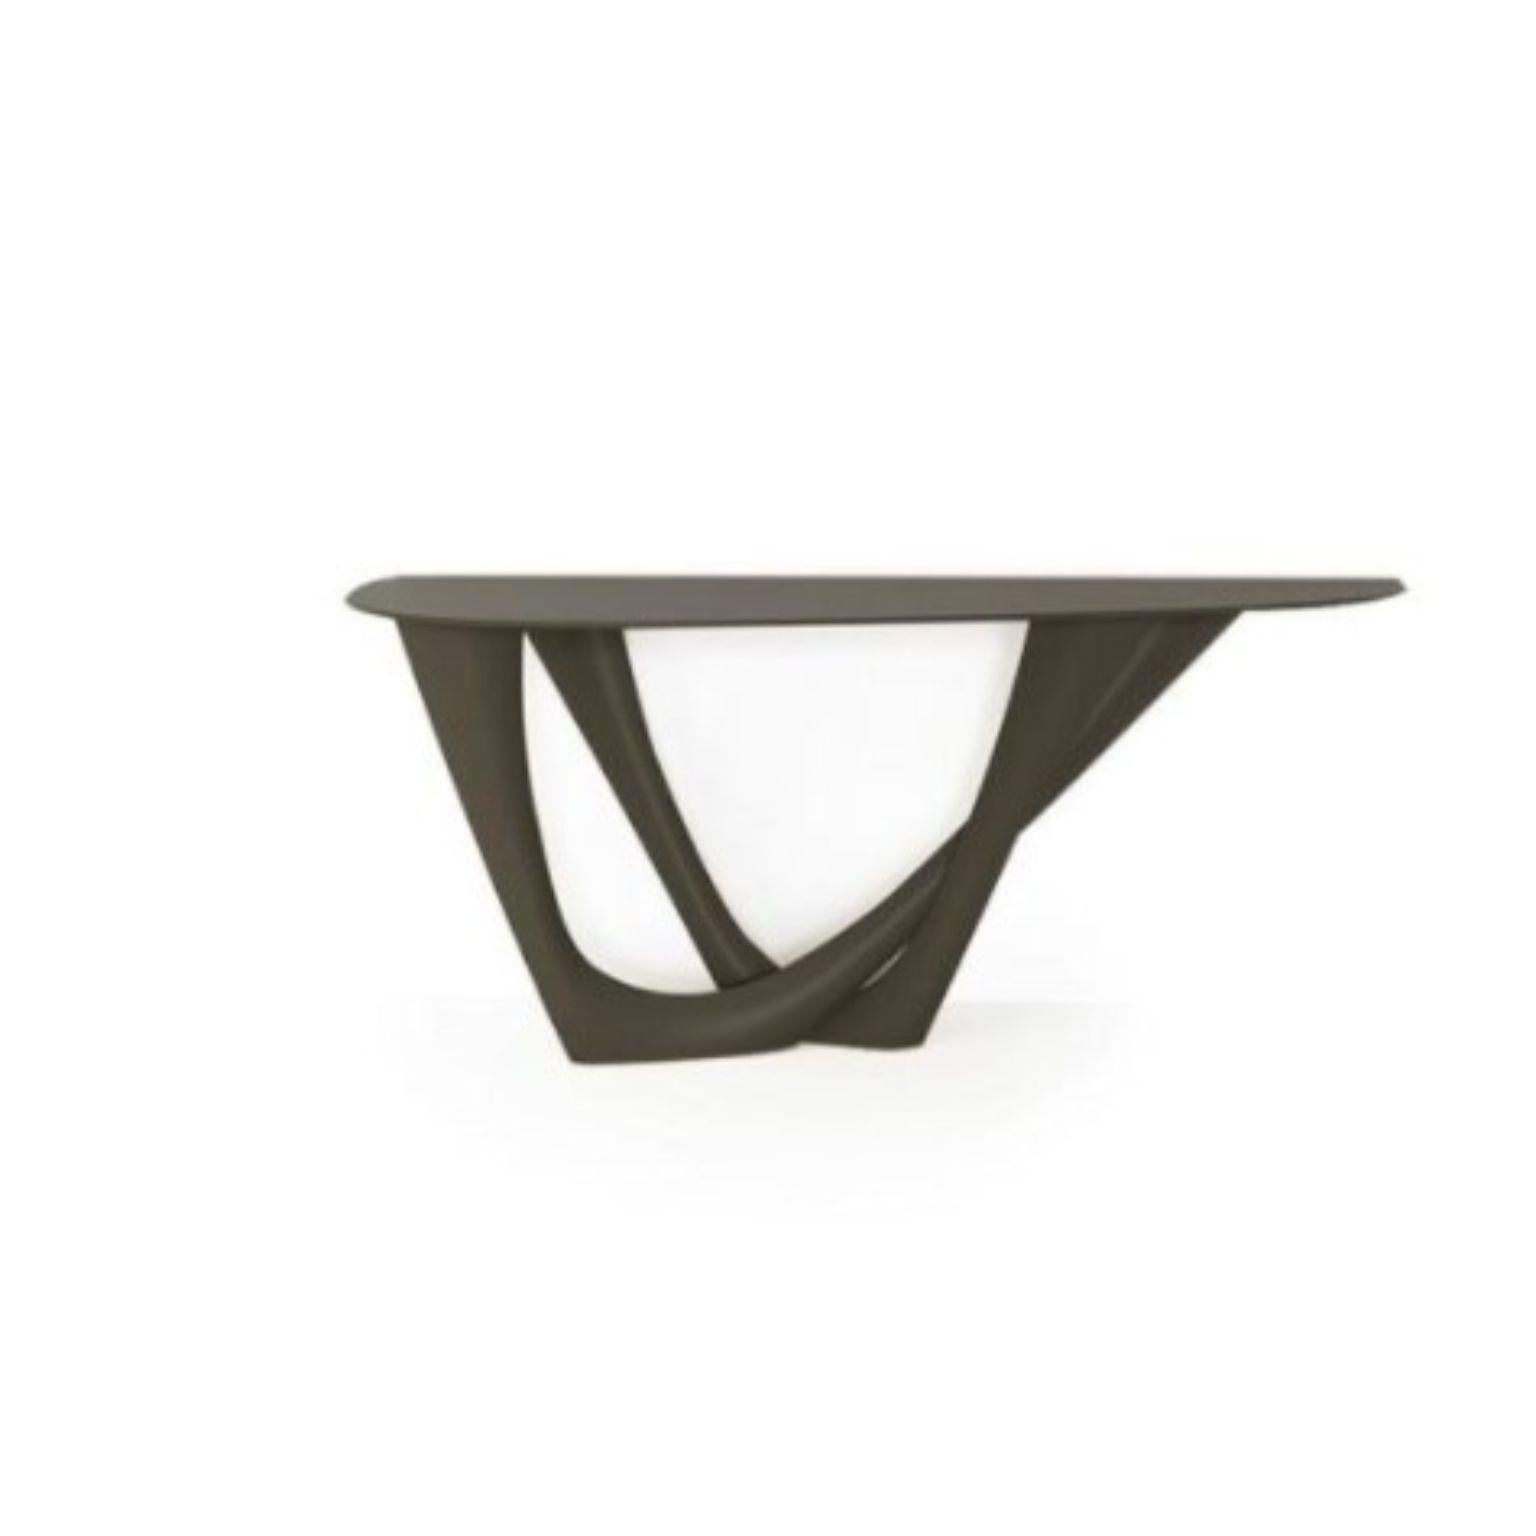 Umbra grey G-Console duo steel base and top by Zieta
Dimensions: D 56 x W 168 x H 75 cm 
Material: Steel.
Also available in different colors and dimensions.

G-Console is another bionic object in our collection. Created for smaller spaces, it gives